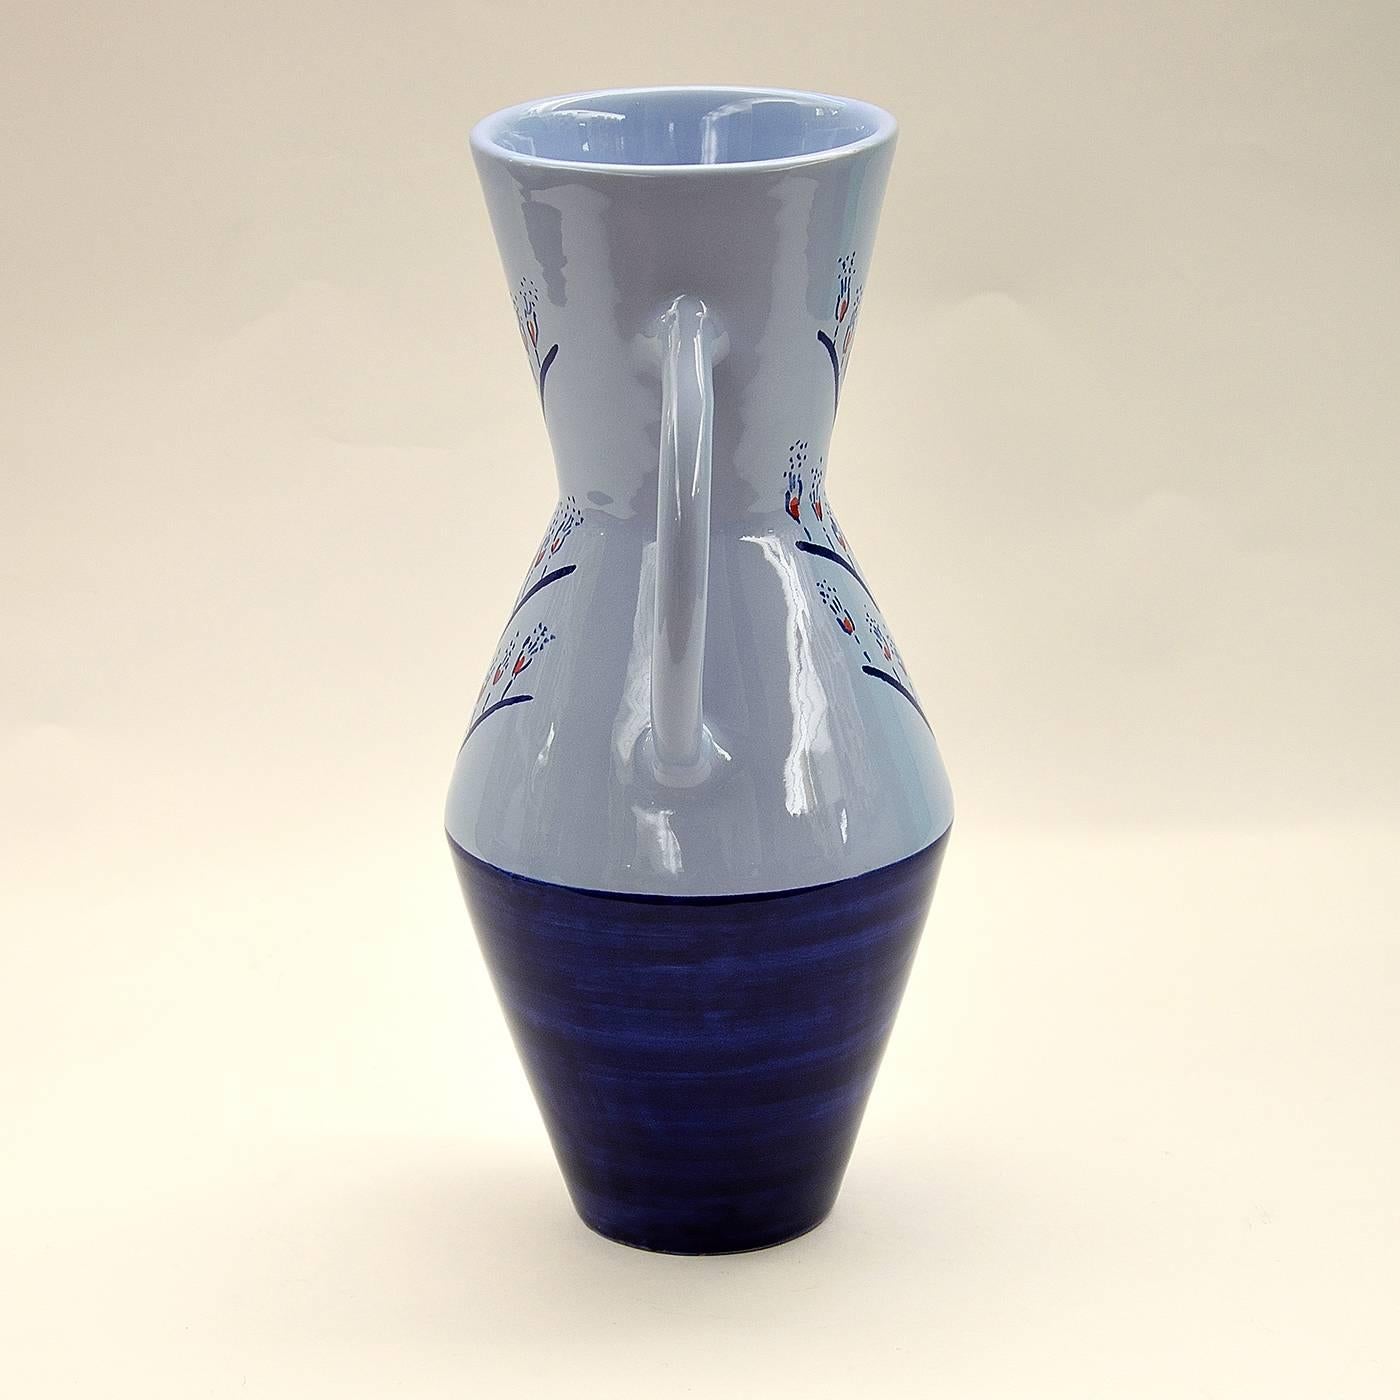 This stunning ceramic vase with handles was made on a lathe and enameled in earthenware. It was hand-painted in a beautiful deep blue at the foot and decorated with blue and red hand-painted designs over the glossy blue base. This piece is one in a